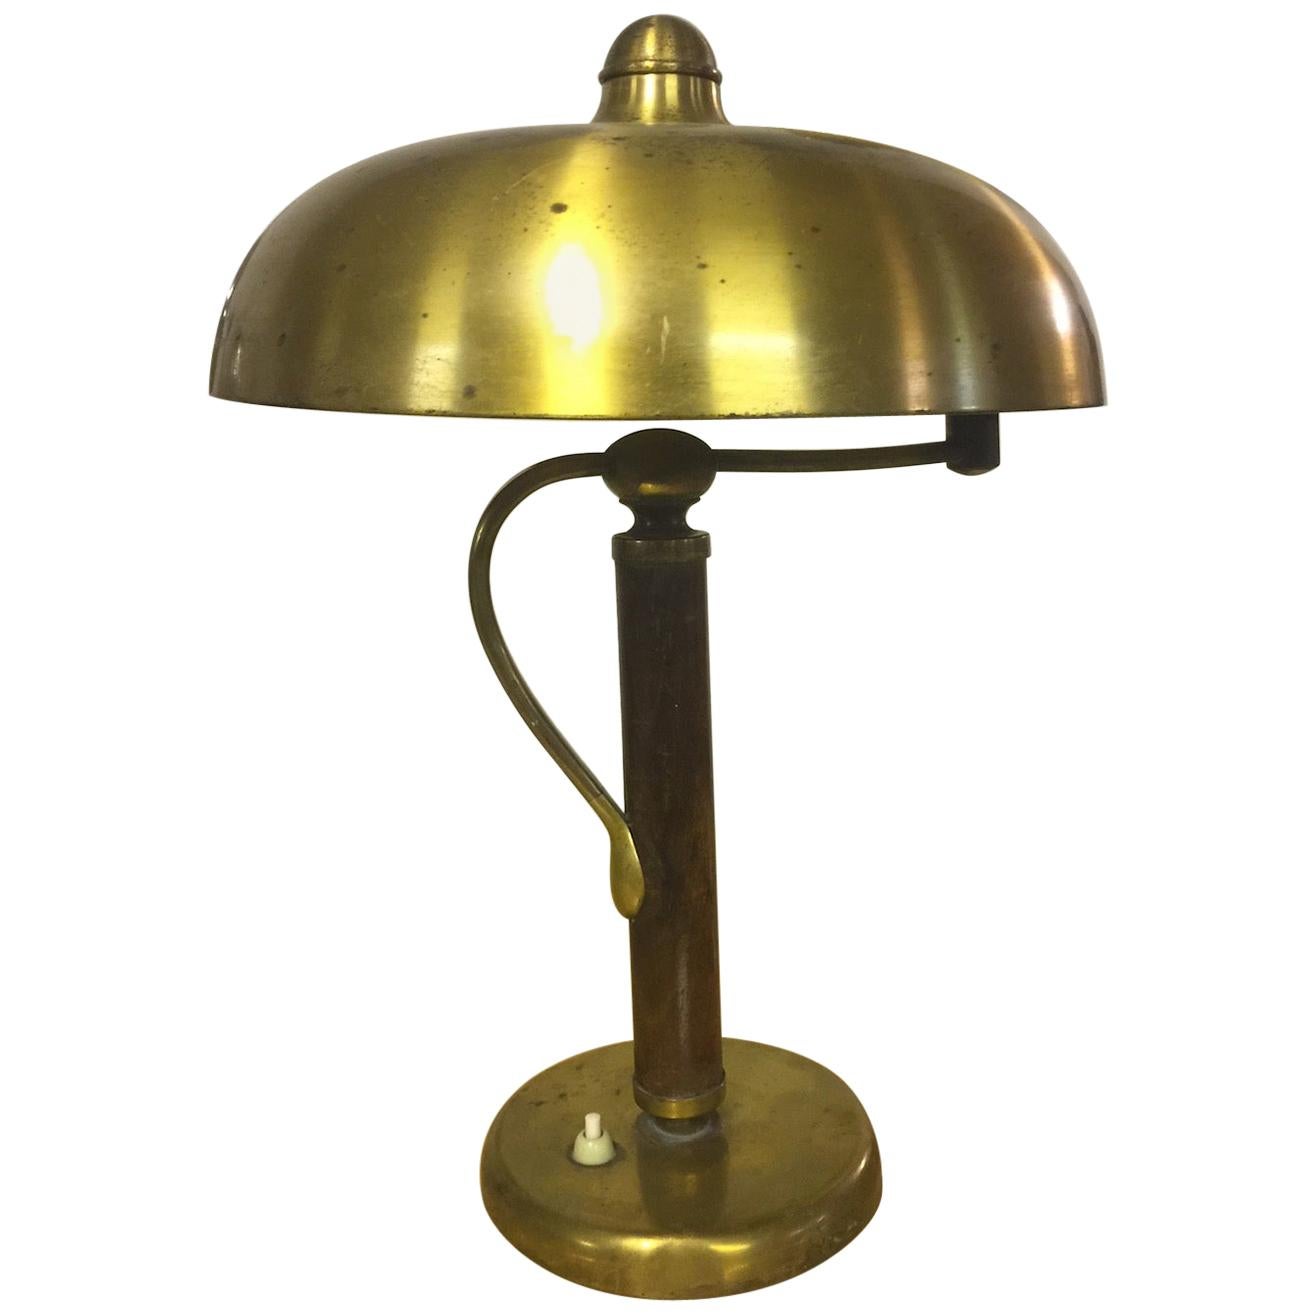 Very Rare and Exclusive Alfed Müller Table Lamp